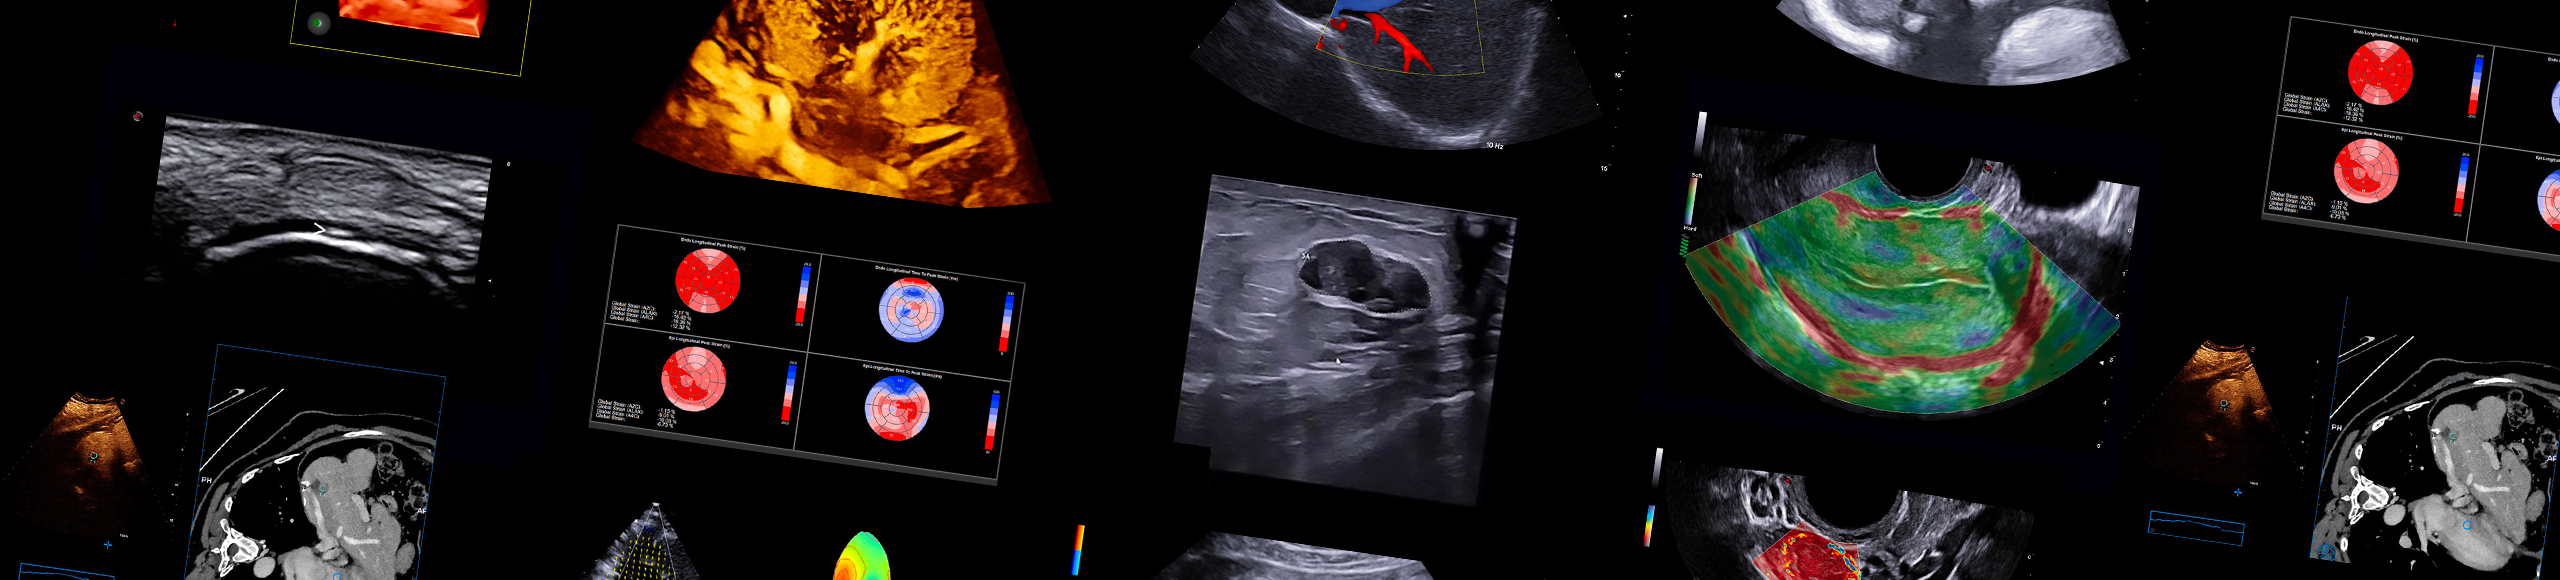 Ultrasound Clinical Images